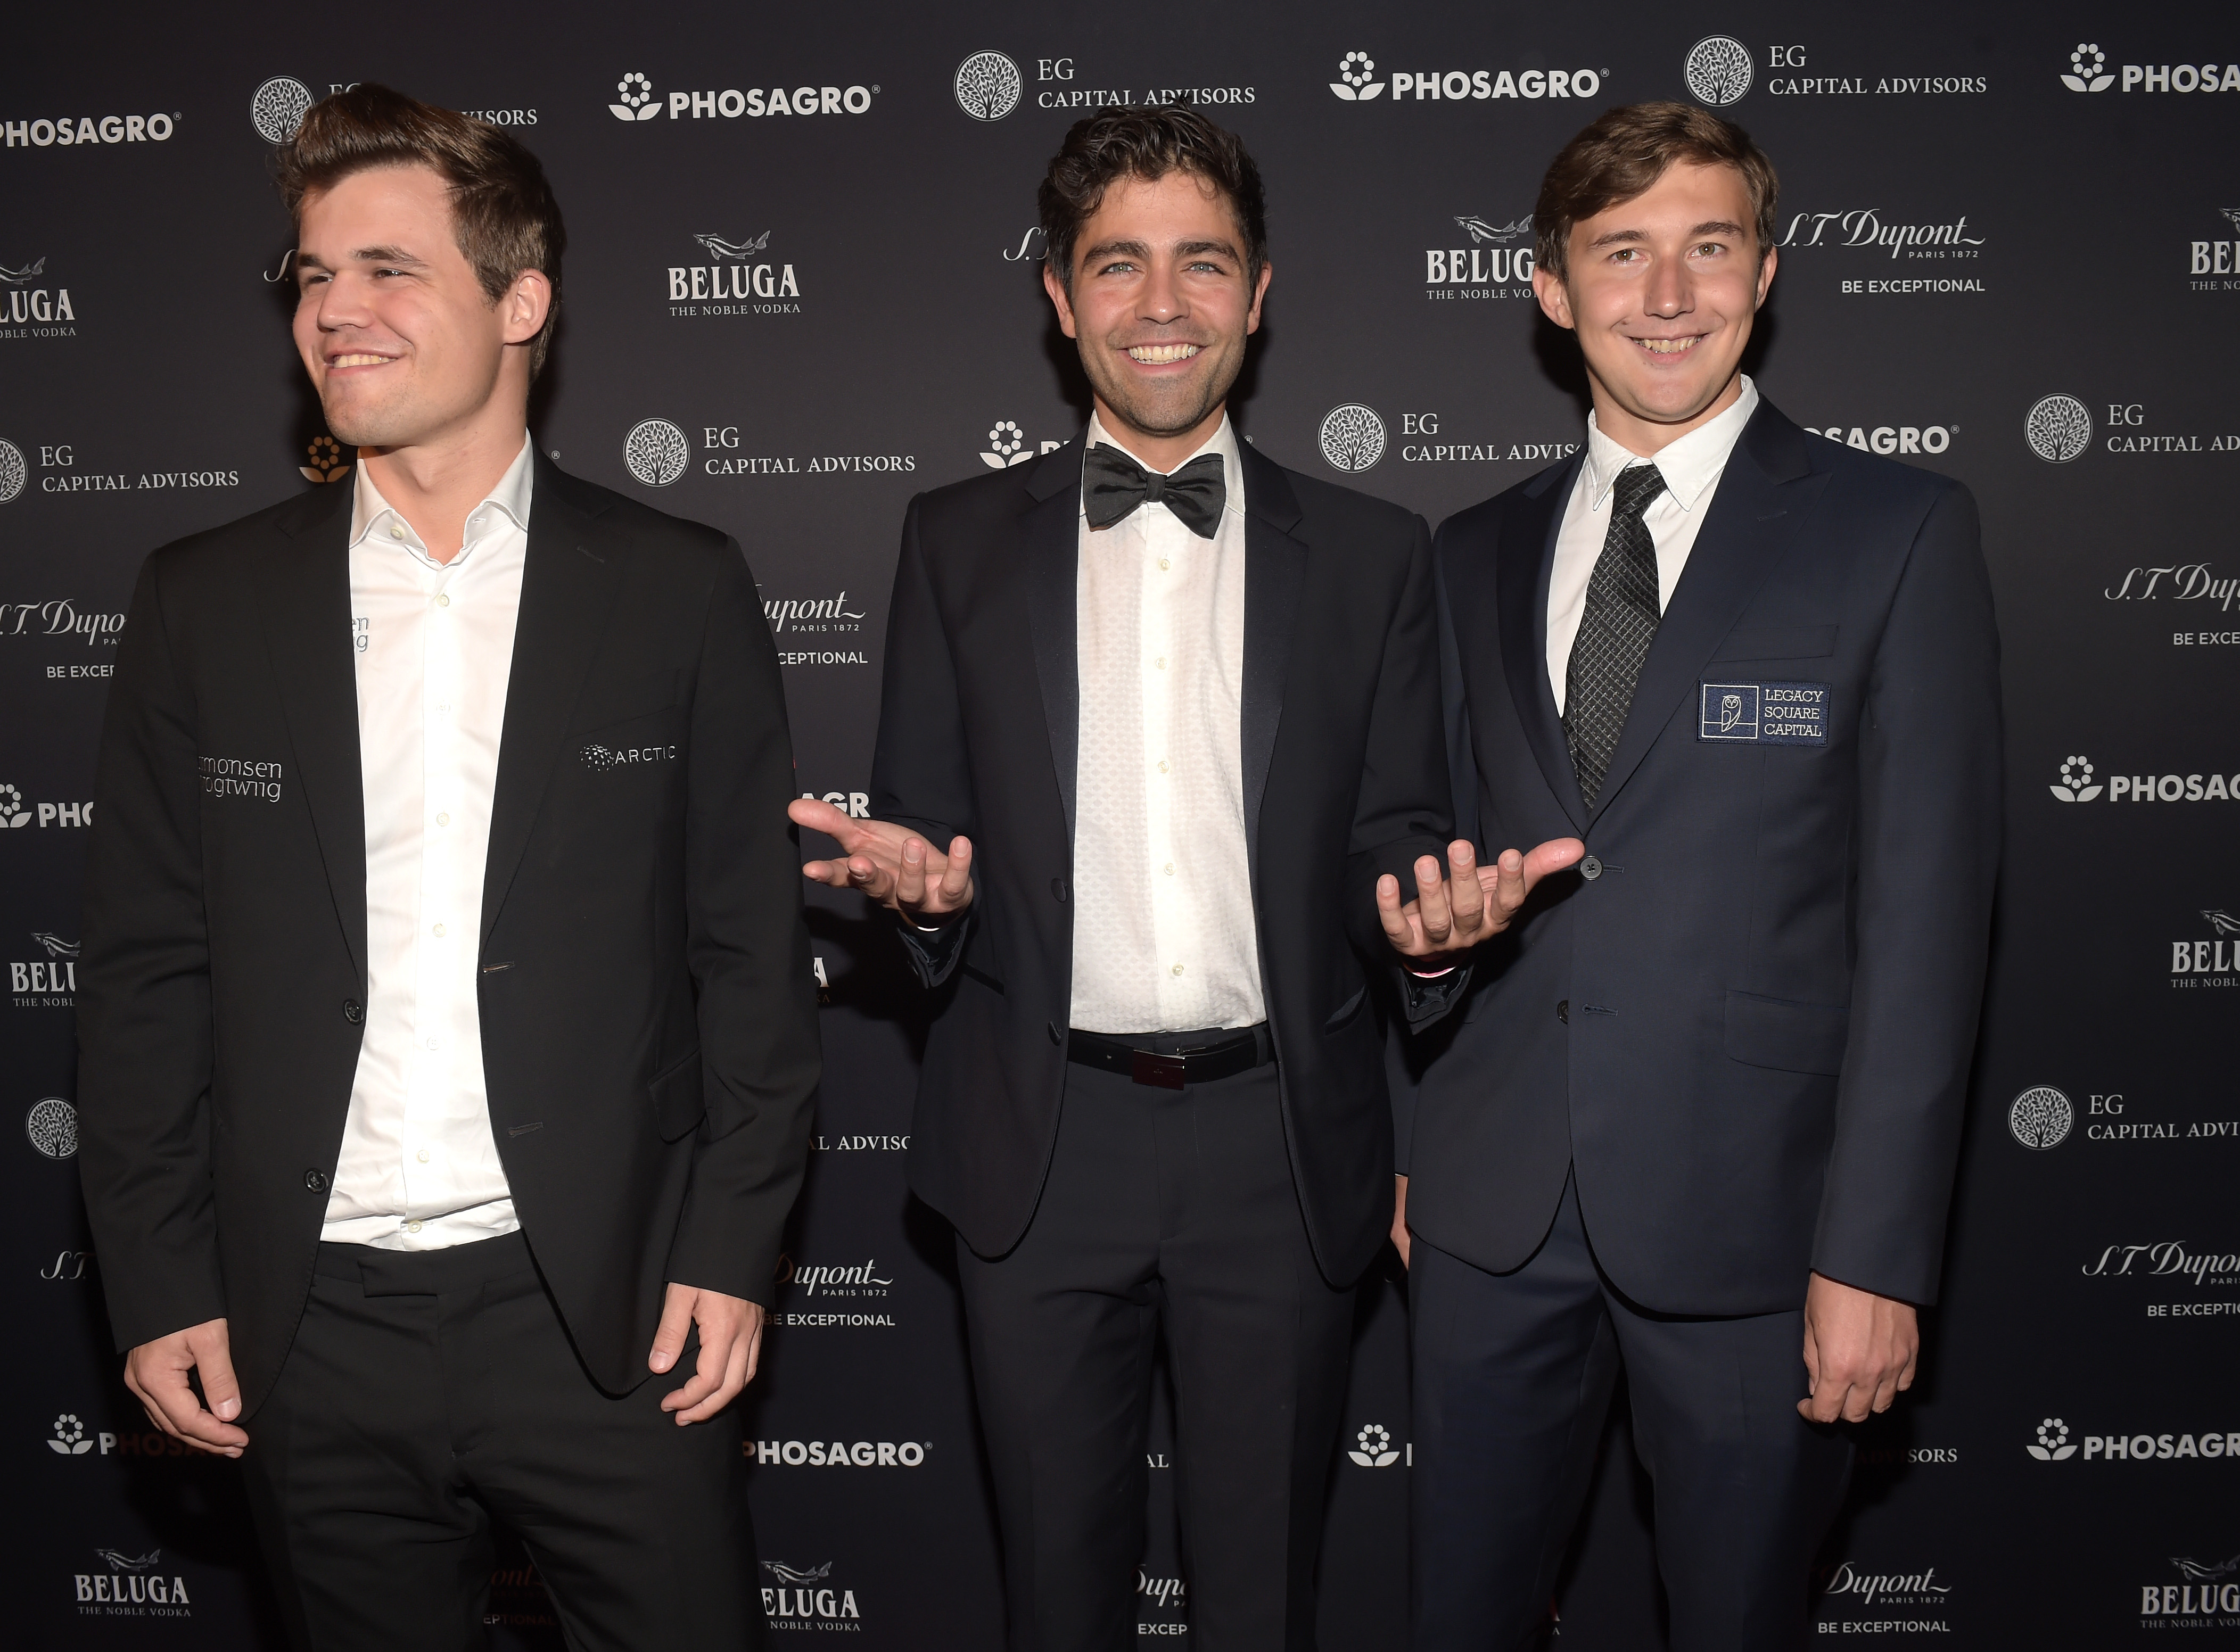 It's his move: World chess champion Magnus Carlsen uses Microsoft  technology to collaborate with his team and keep strategies secure - Stories